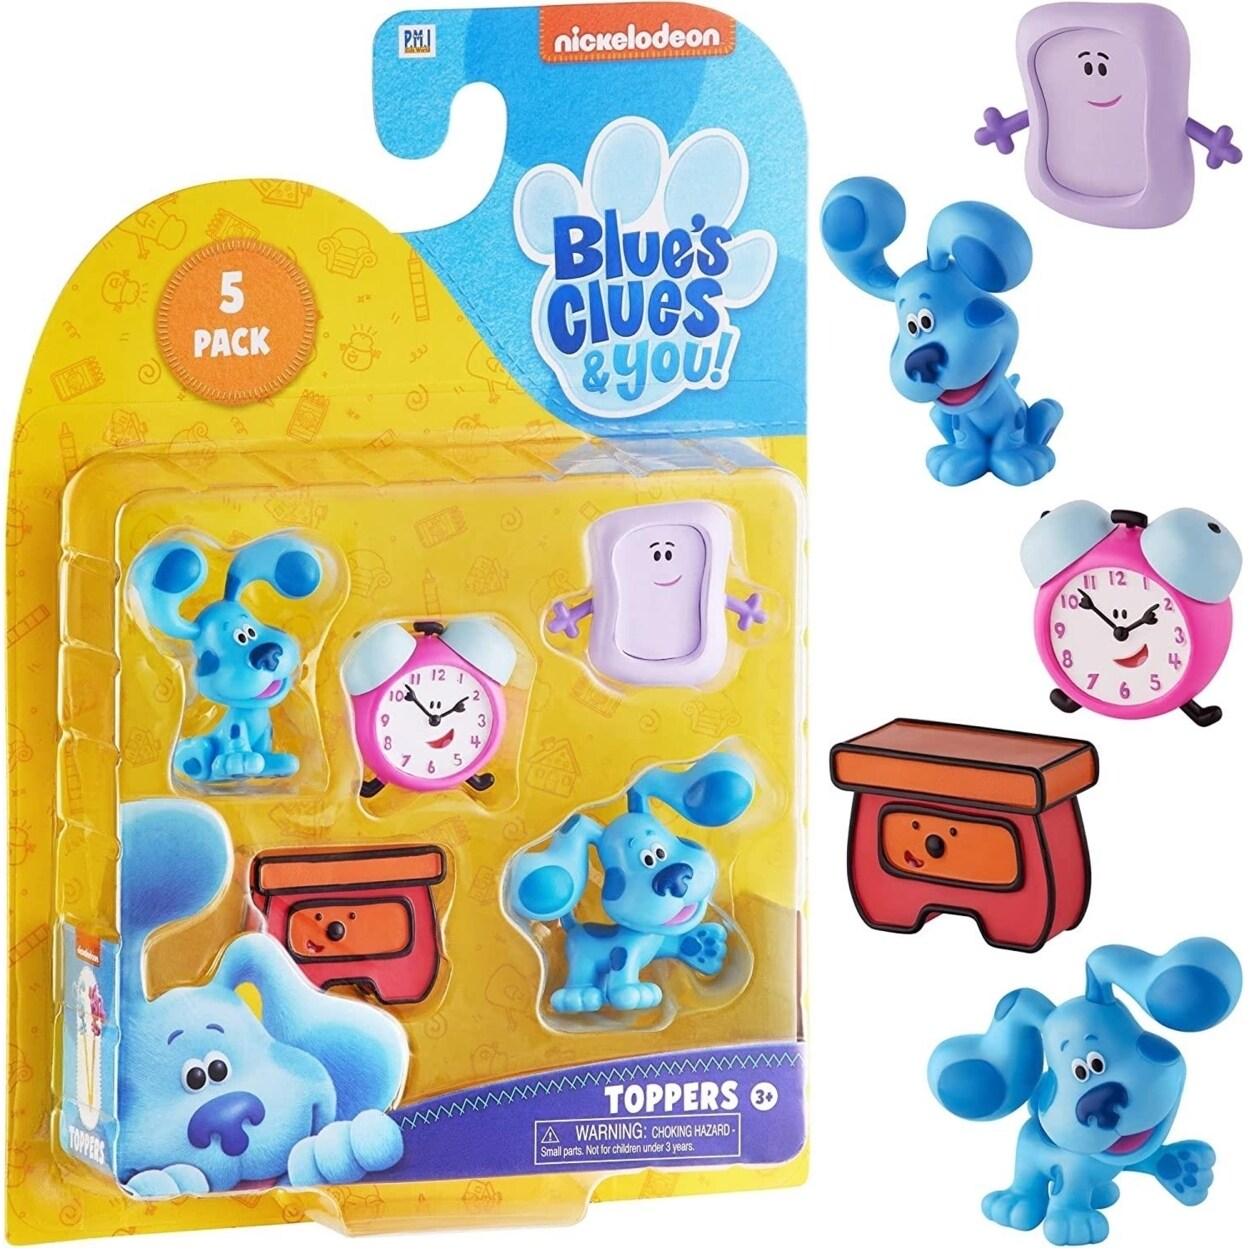 PMI International Blues Clues Pencil Toppers 5pk Sidetable Slippery Soap Tickety Tock Clock Set